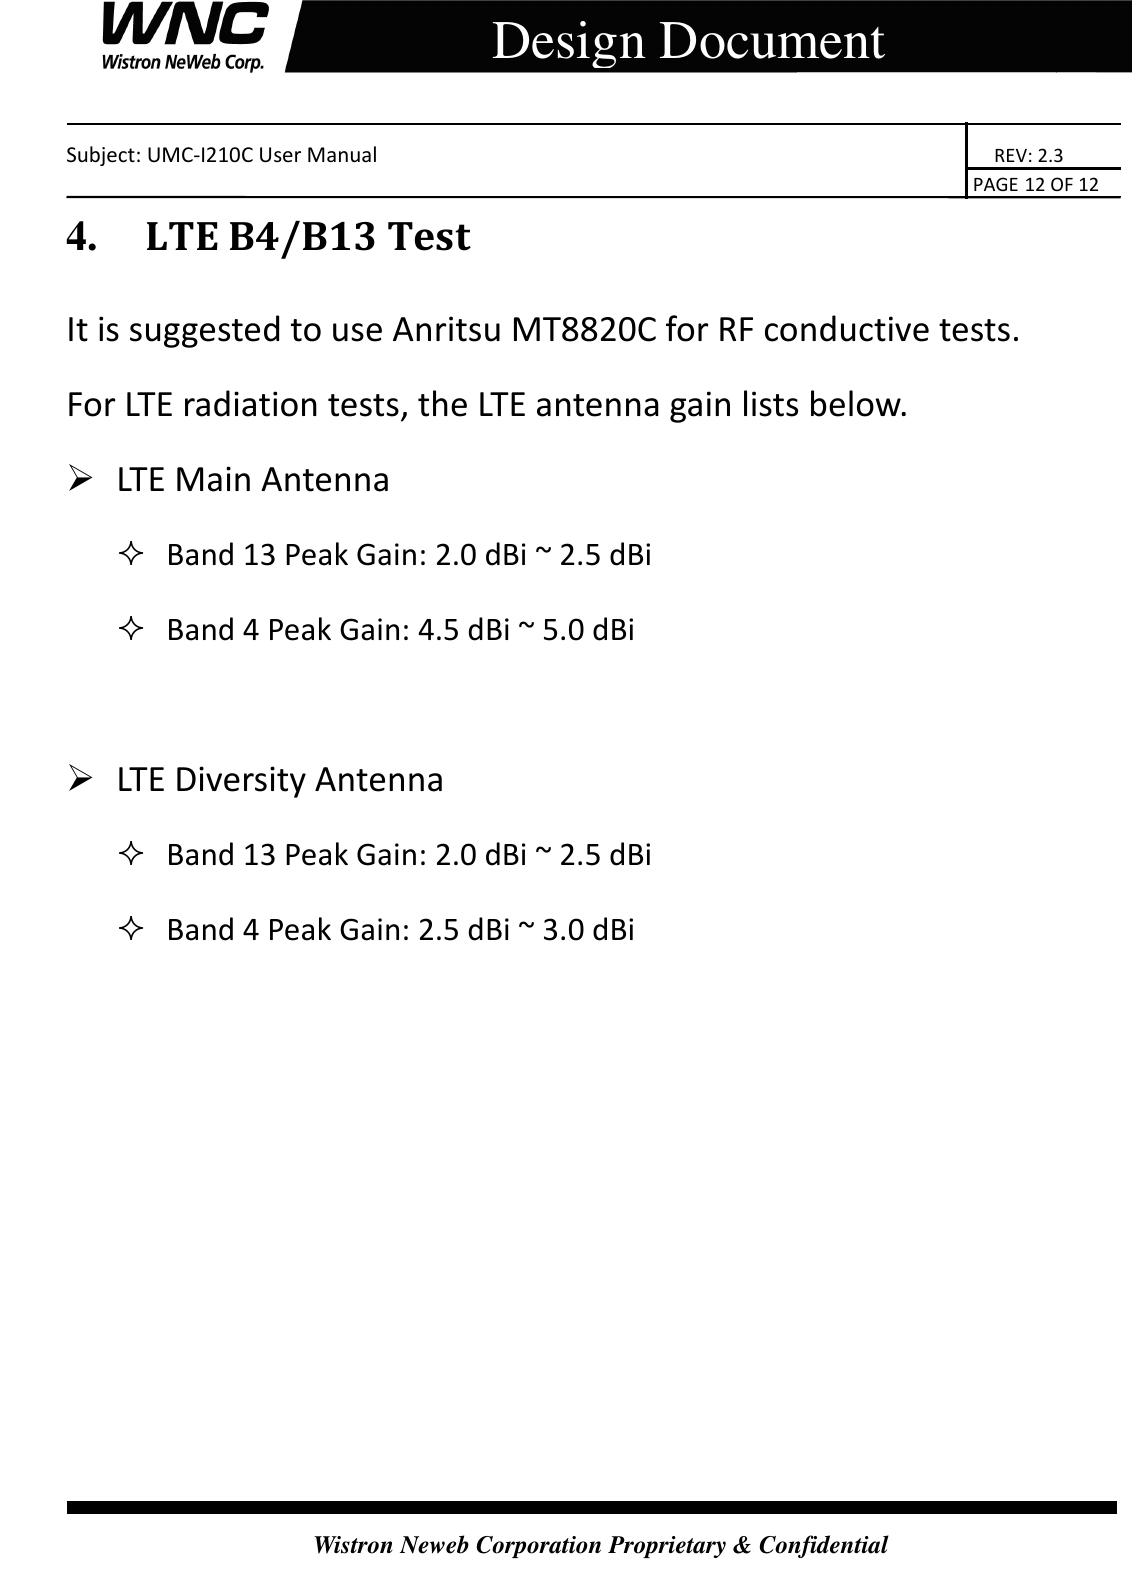    Subject: UMC-I210C User Manual                                                                       REV: 2.3                                                                                                                                                                               PAGE 12 OF 12  Wistron Neweb Corporation Proprietary &amp; Confidential     Design Document 4.     LTE B4/B13 Test It is suggested to use Anritsu MT8820C for RF conductive tests. For LTE radiation tests, the LTE antenna gain lists below.  LTE Main Antenna    Band 13 Peak Gain: 2.0 dBi ~ 2.5 dBi    Band 4 Peak Gain: 4.5 dBi ~ 5.0 dBi     LTE Diversity Antenna    Band 13 Peak Gain: 2.0 dBi ~ 2.5 dBi    Band 4 Peak Gain: 2.5 dBi ~ 3.0 dBi    